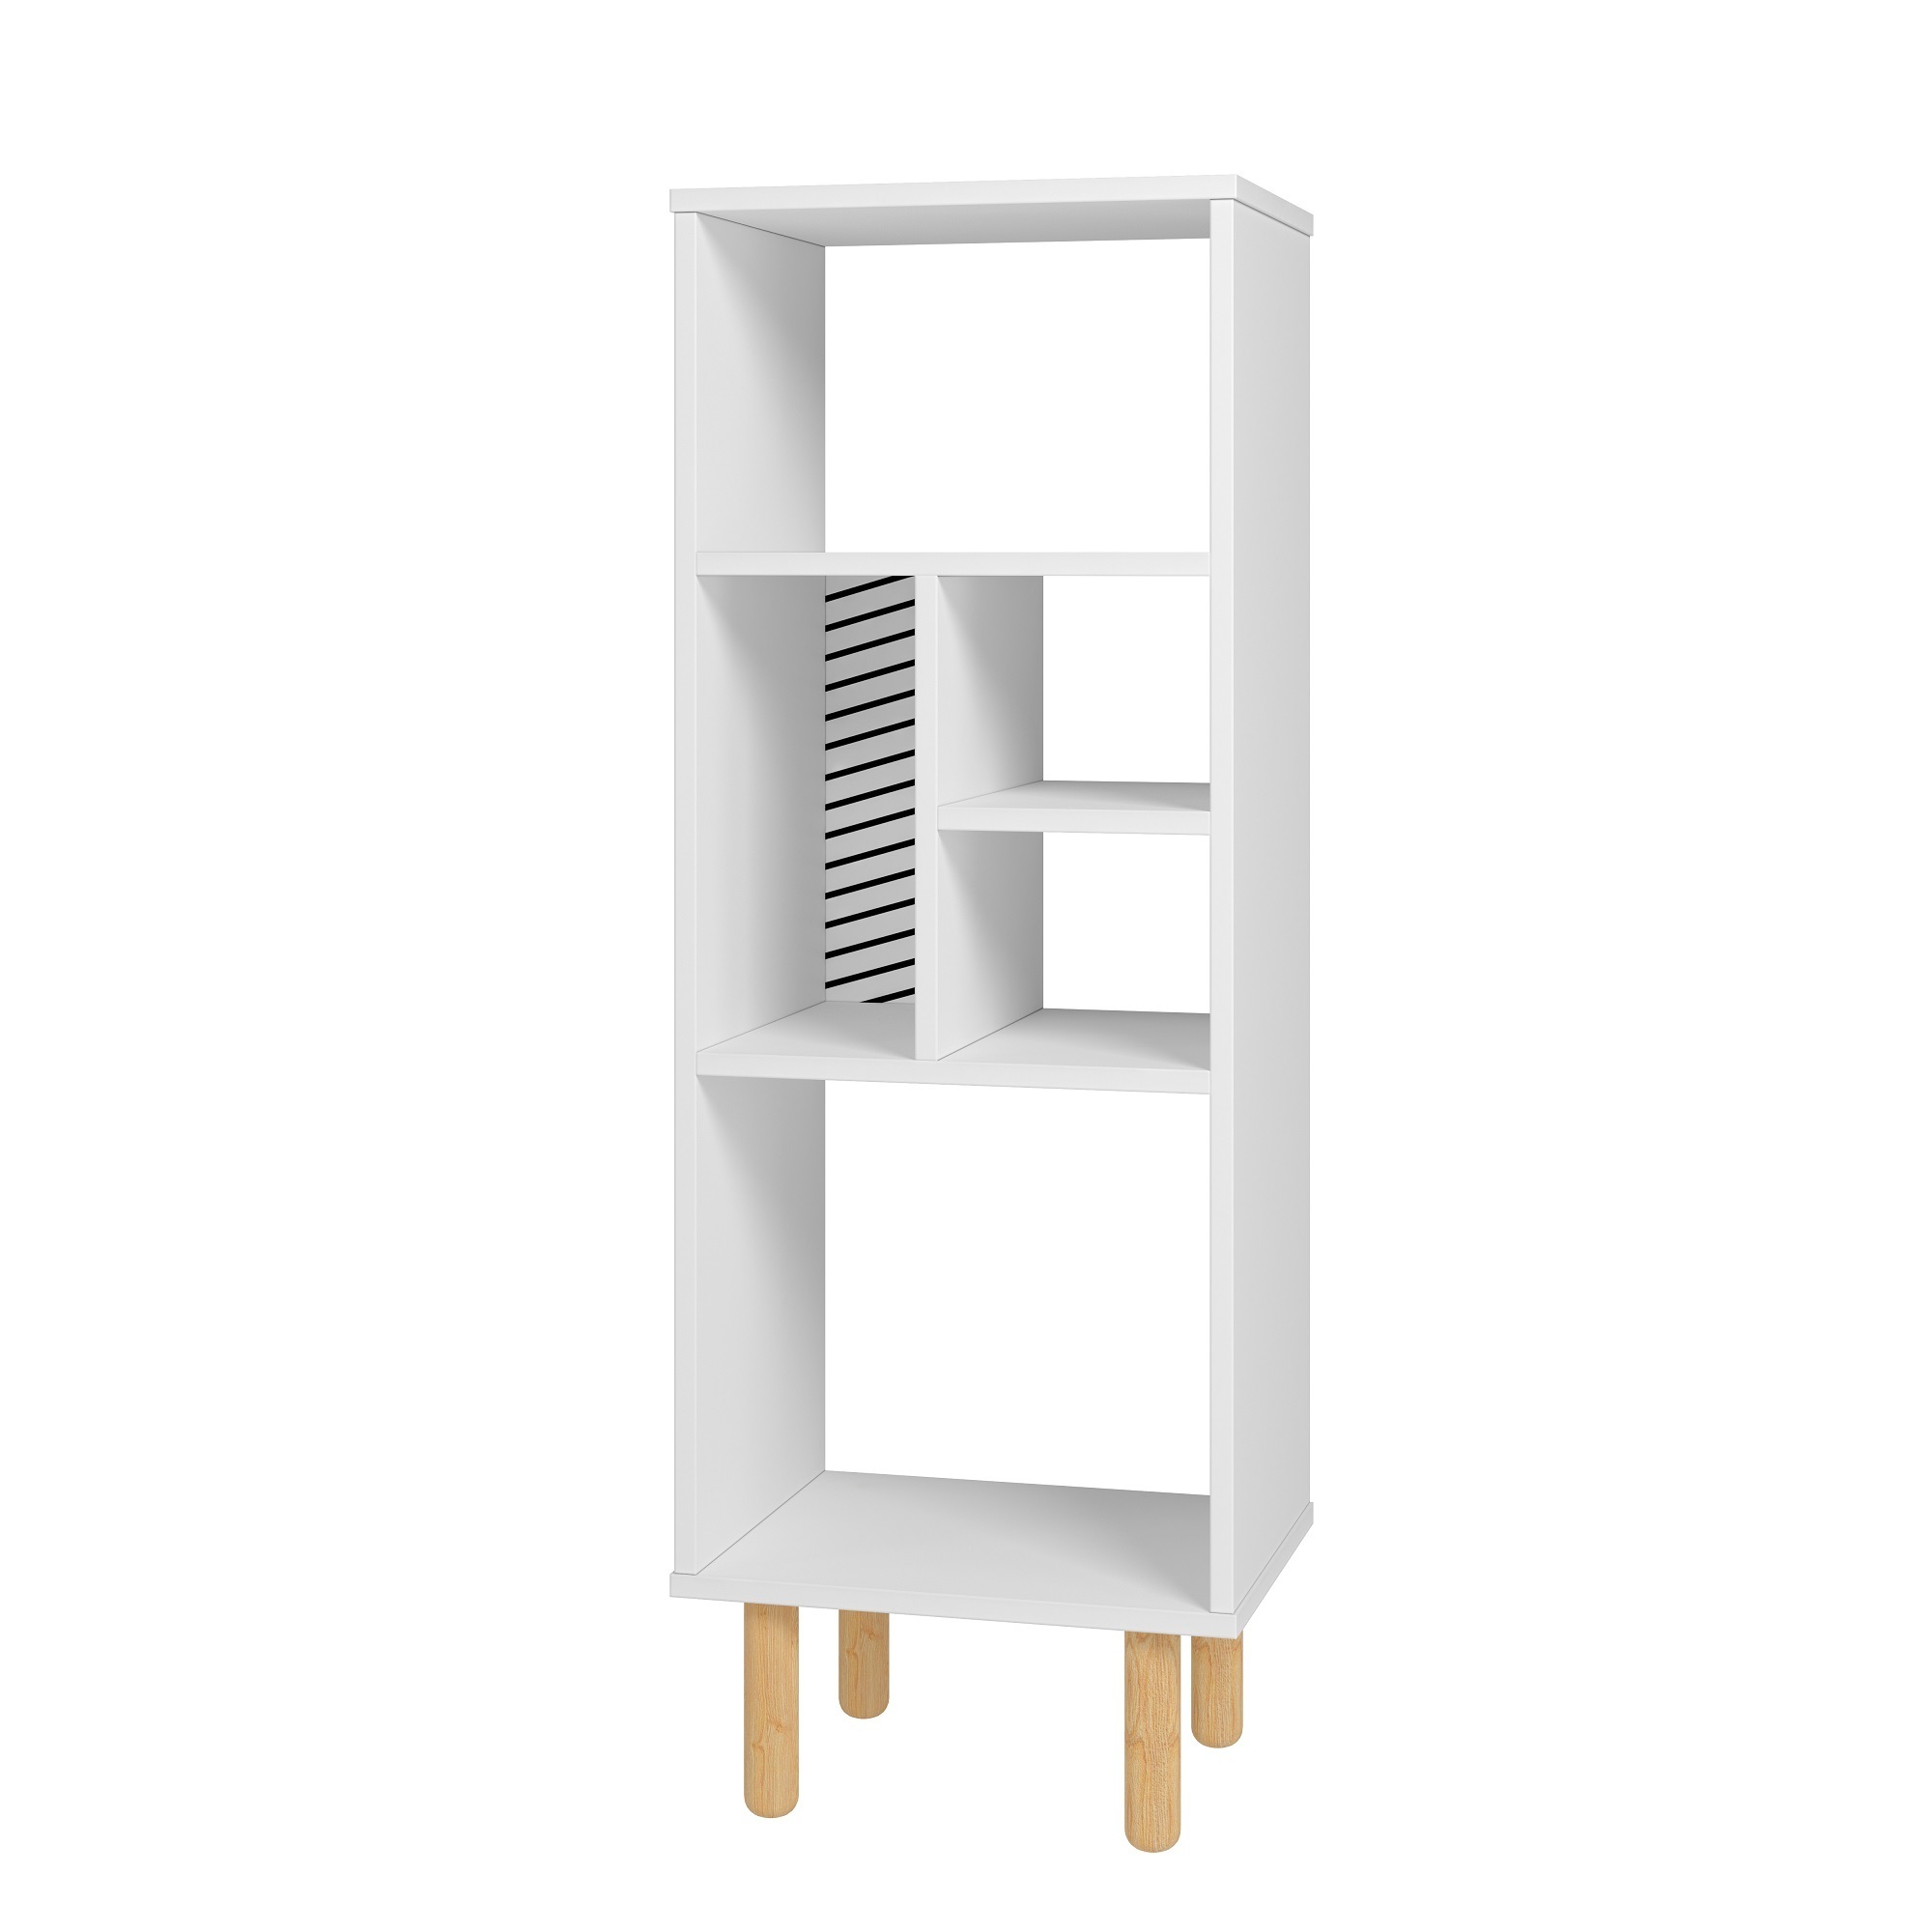 Manhattan Comfort, Essex 42.51 Bookcase in White and Zebra, Height 42.51 in, Shelves (qty.) 5 Material MDPE, Model 411AMC